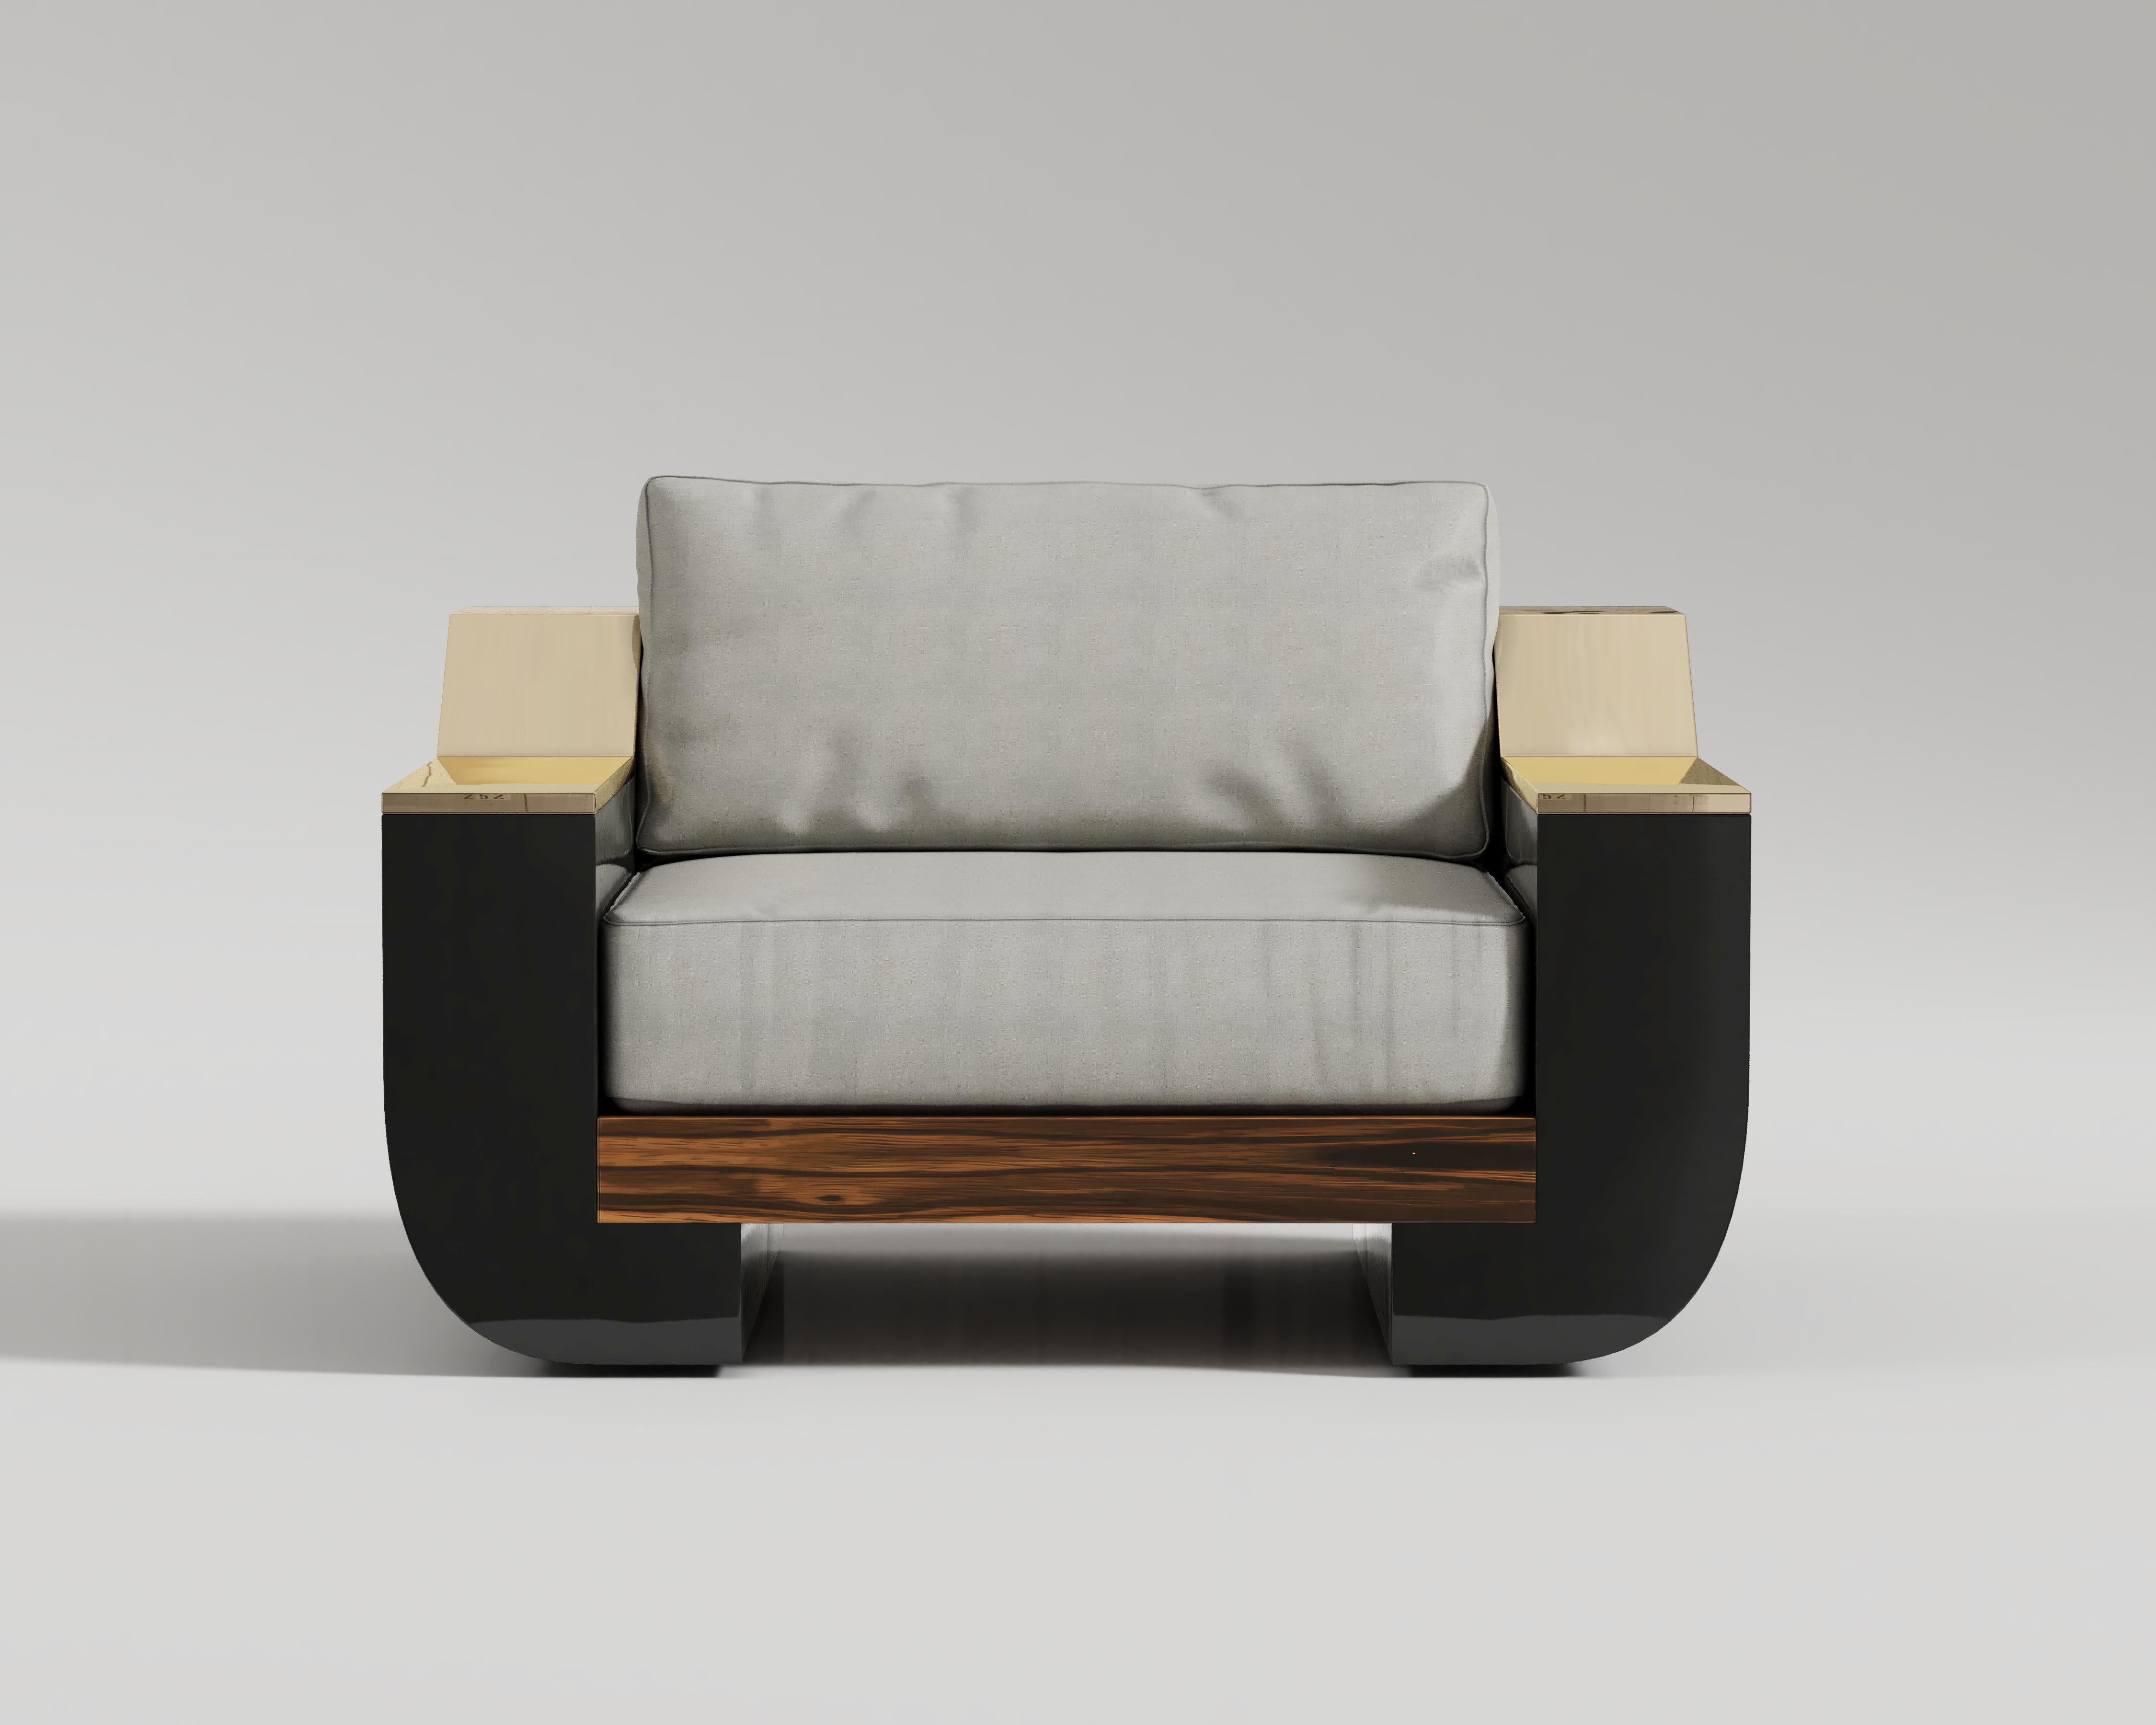 Meilleur Nom Sofa

Meilleur Nom Lounge Chair, with polished lacquer armrests and elaborate bronze details, this chair is an epitome of refined taste in living rooms. The walnut base and backrest are not only stylish but also supportive and adds to